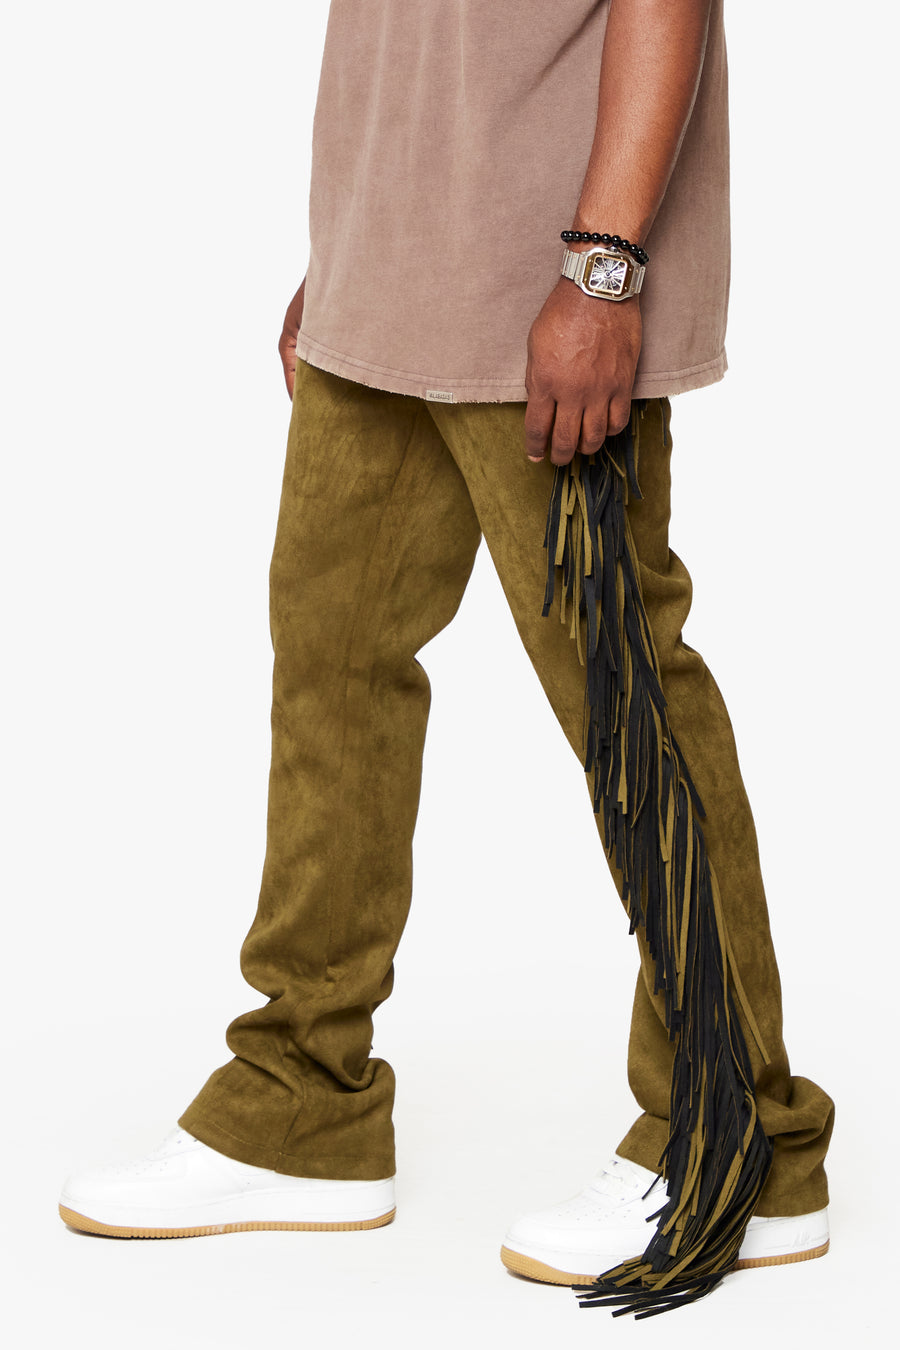 "AVIATOR” OLIVE STACKED FLARE JEAN